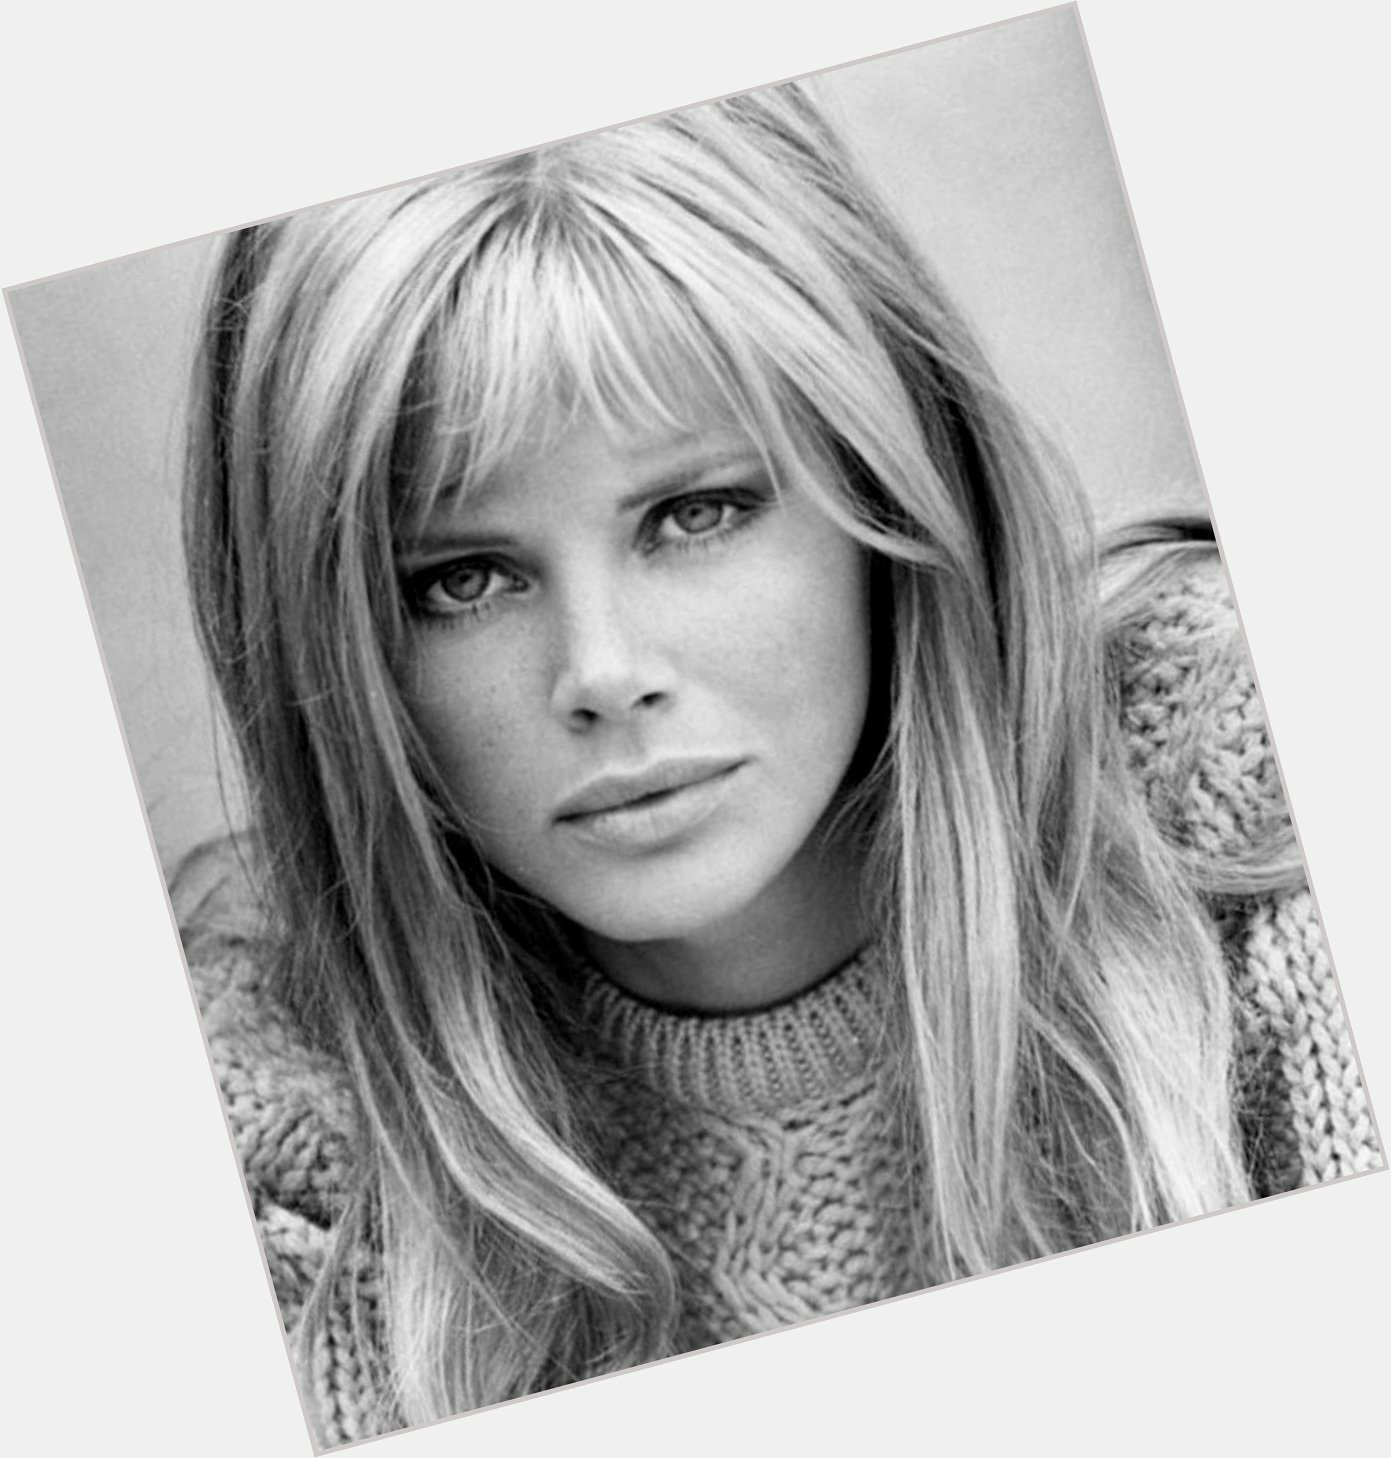 Happy Birthday to Britt Ekland, best known for playing Mary Goodnight in The Man With The Golden Gun 